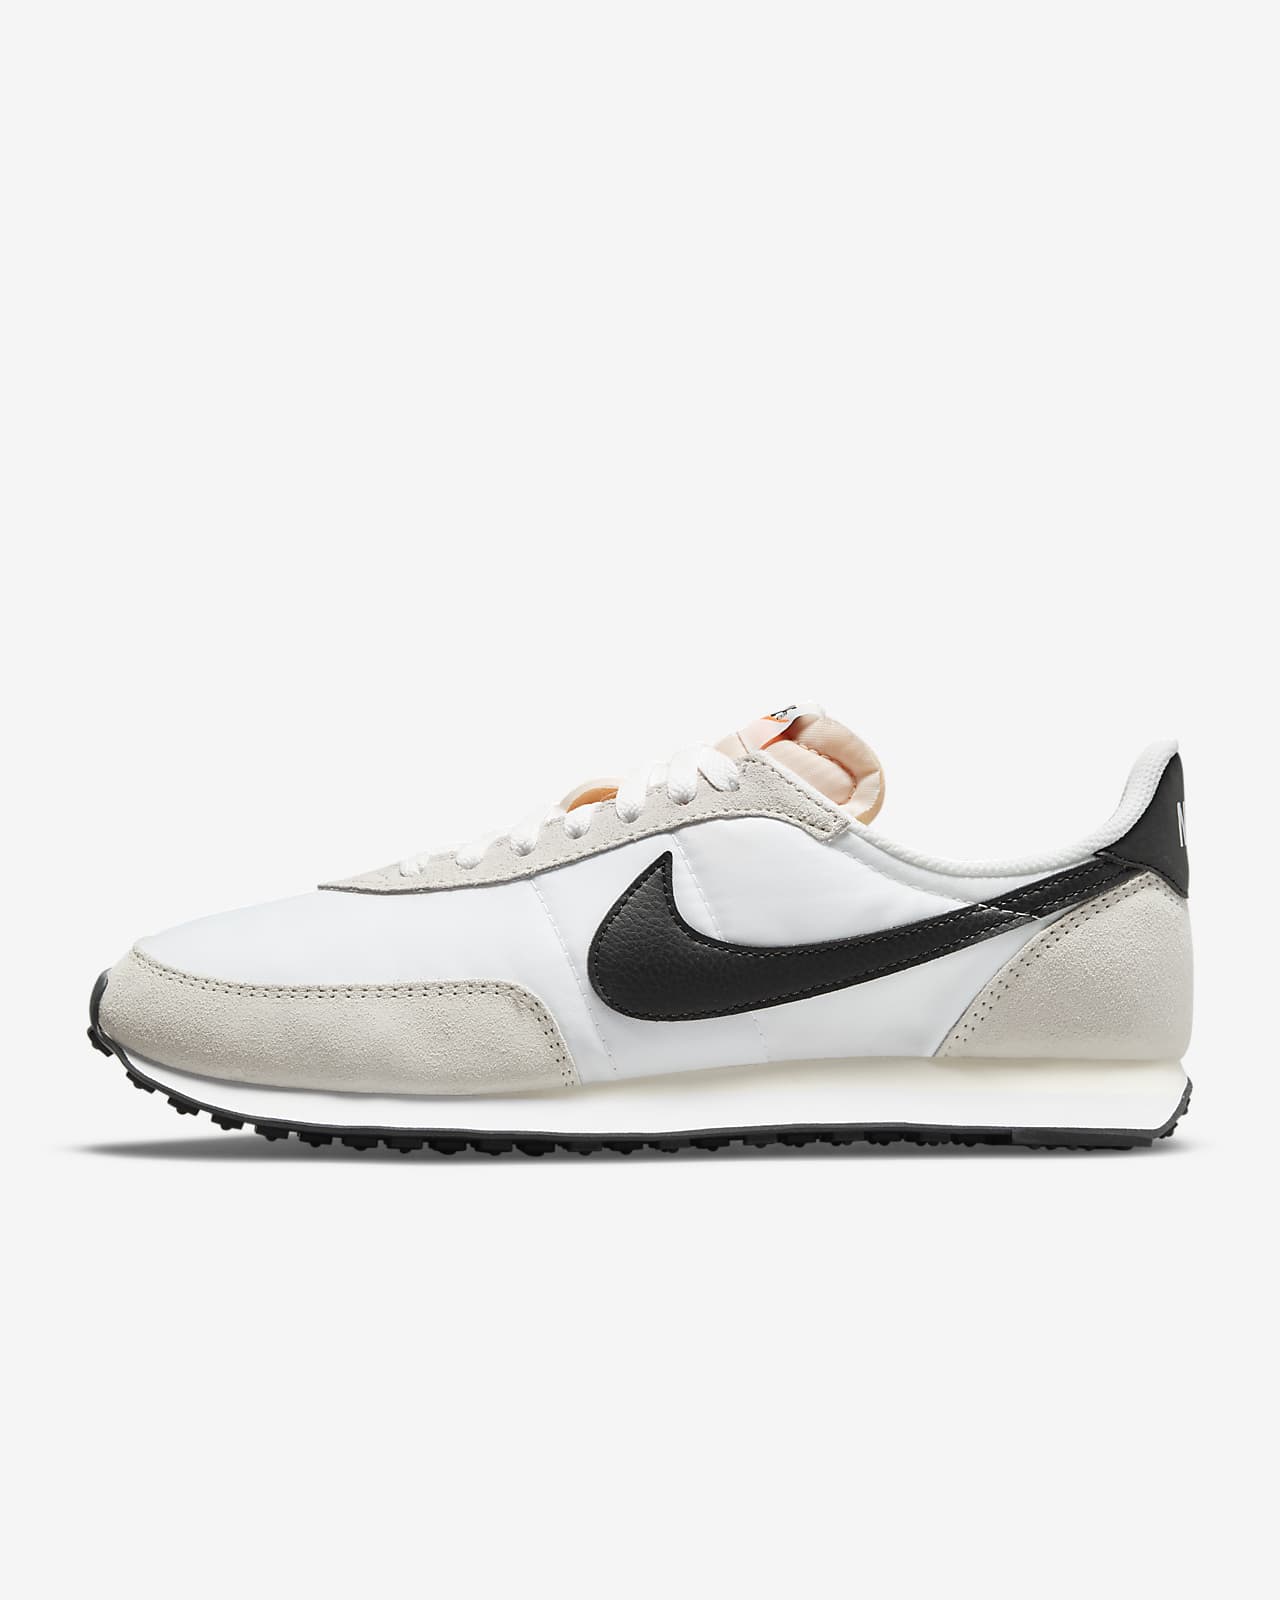 Nike Waffle Trainer 2 Men's Shoes